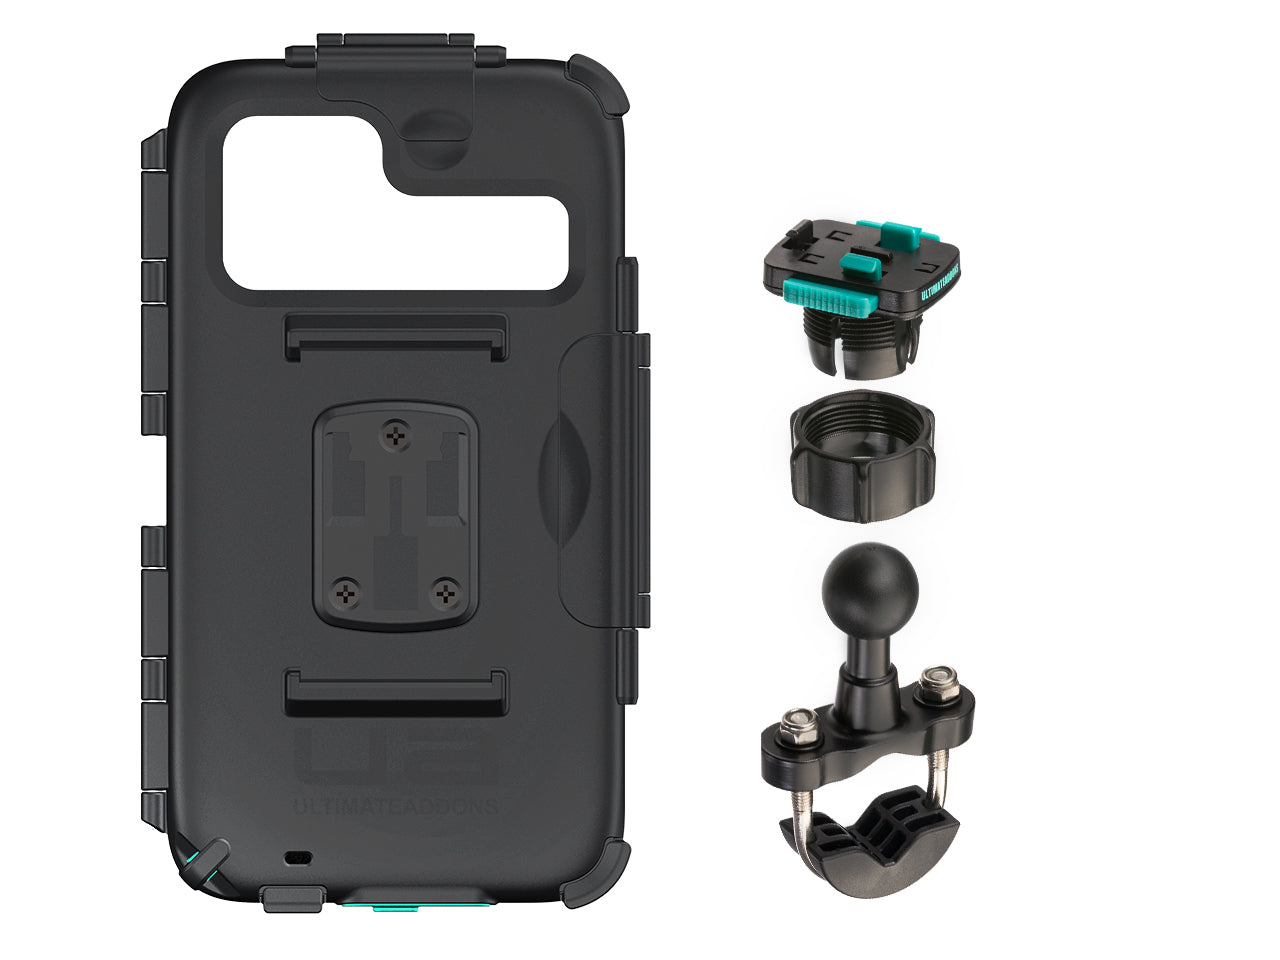 Motorola Universal Waterproof Tough Cases & Motorcycle Attachments